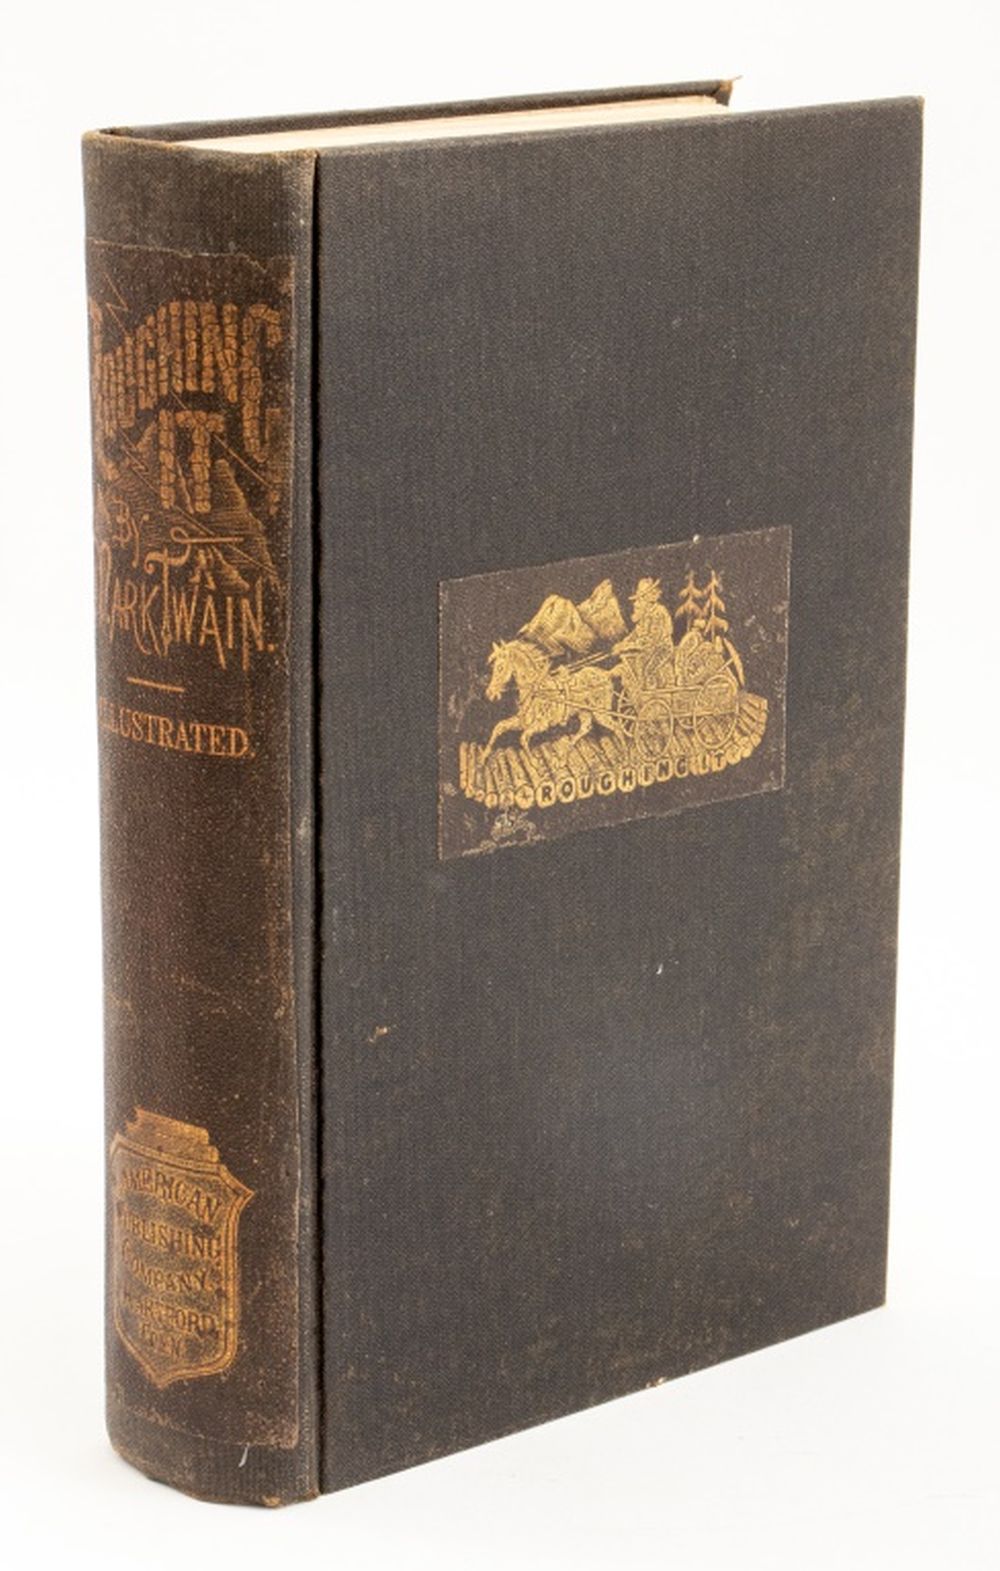 MARK TWAIN "ROUGHING IT" 1ST EDITION,